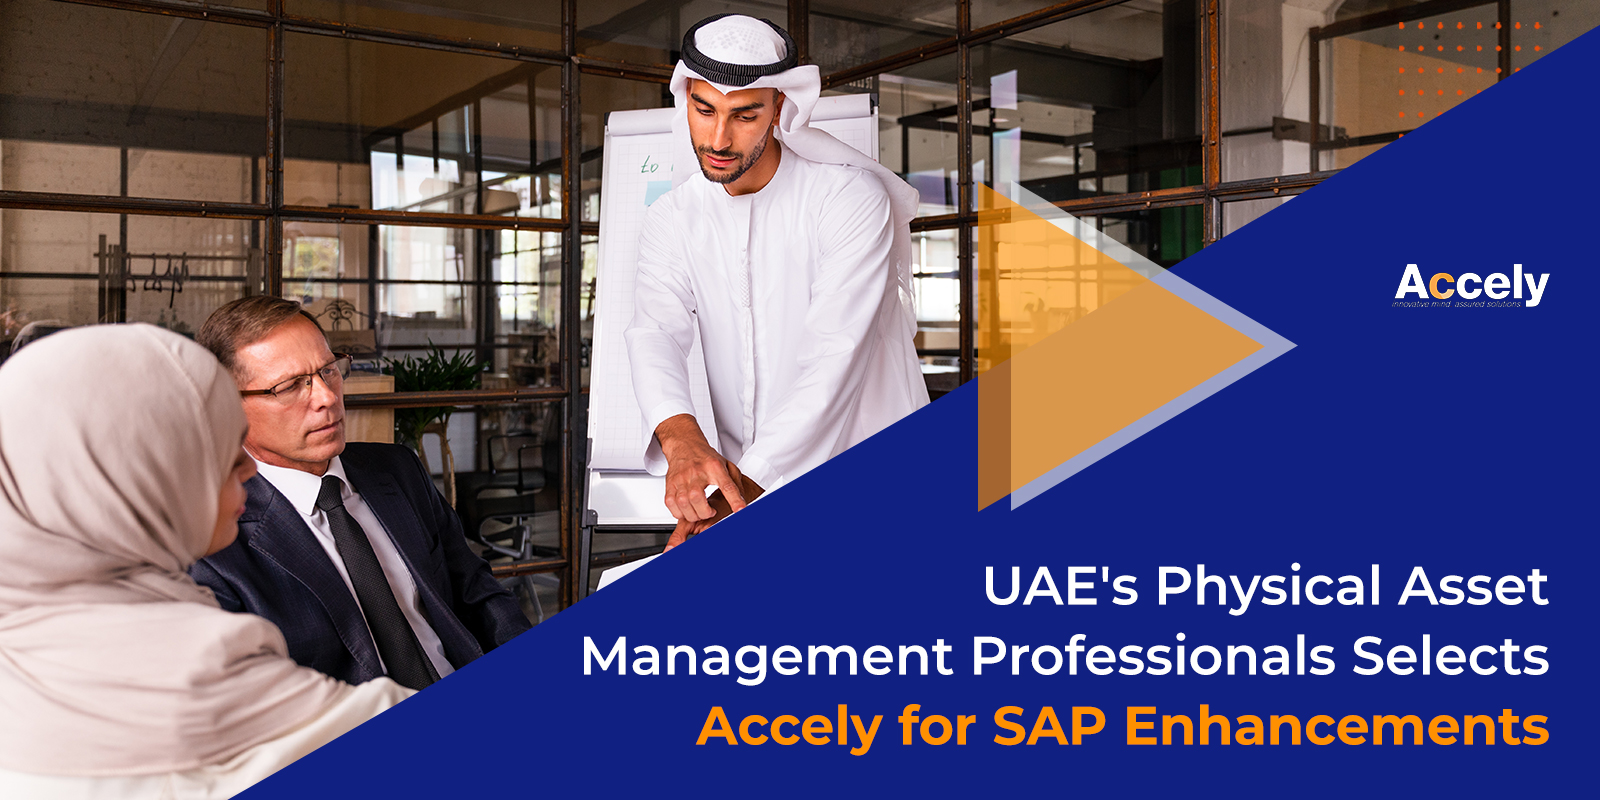 UAE's Physical Asset Management Professionals Selects Accely for SAP Enhancements